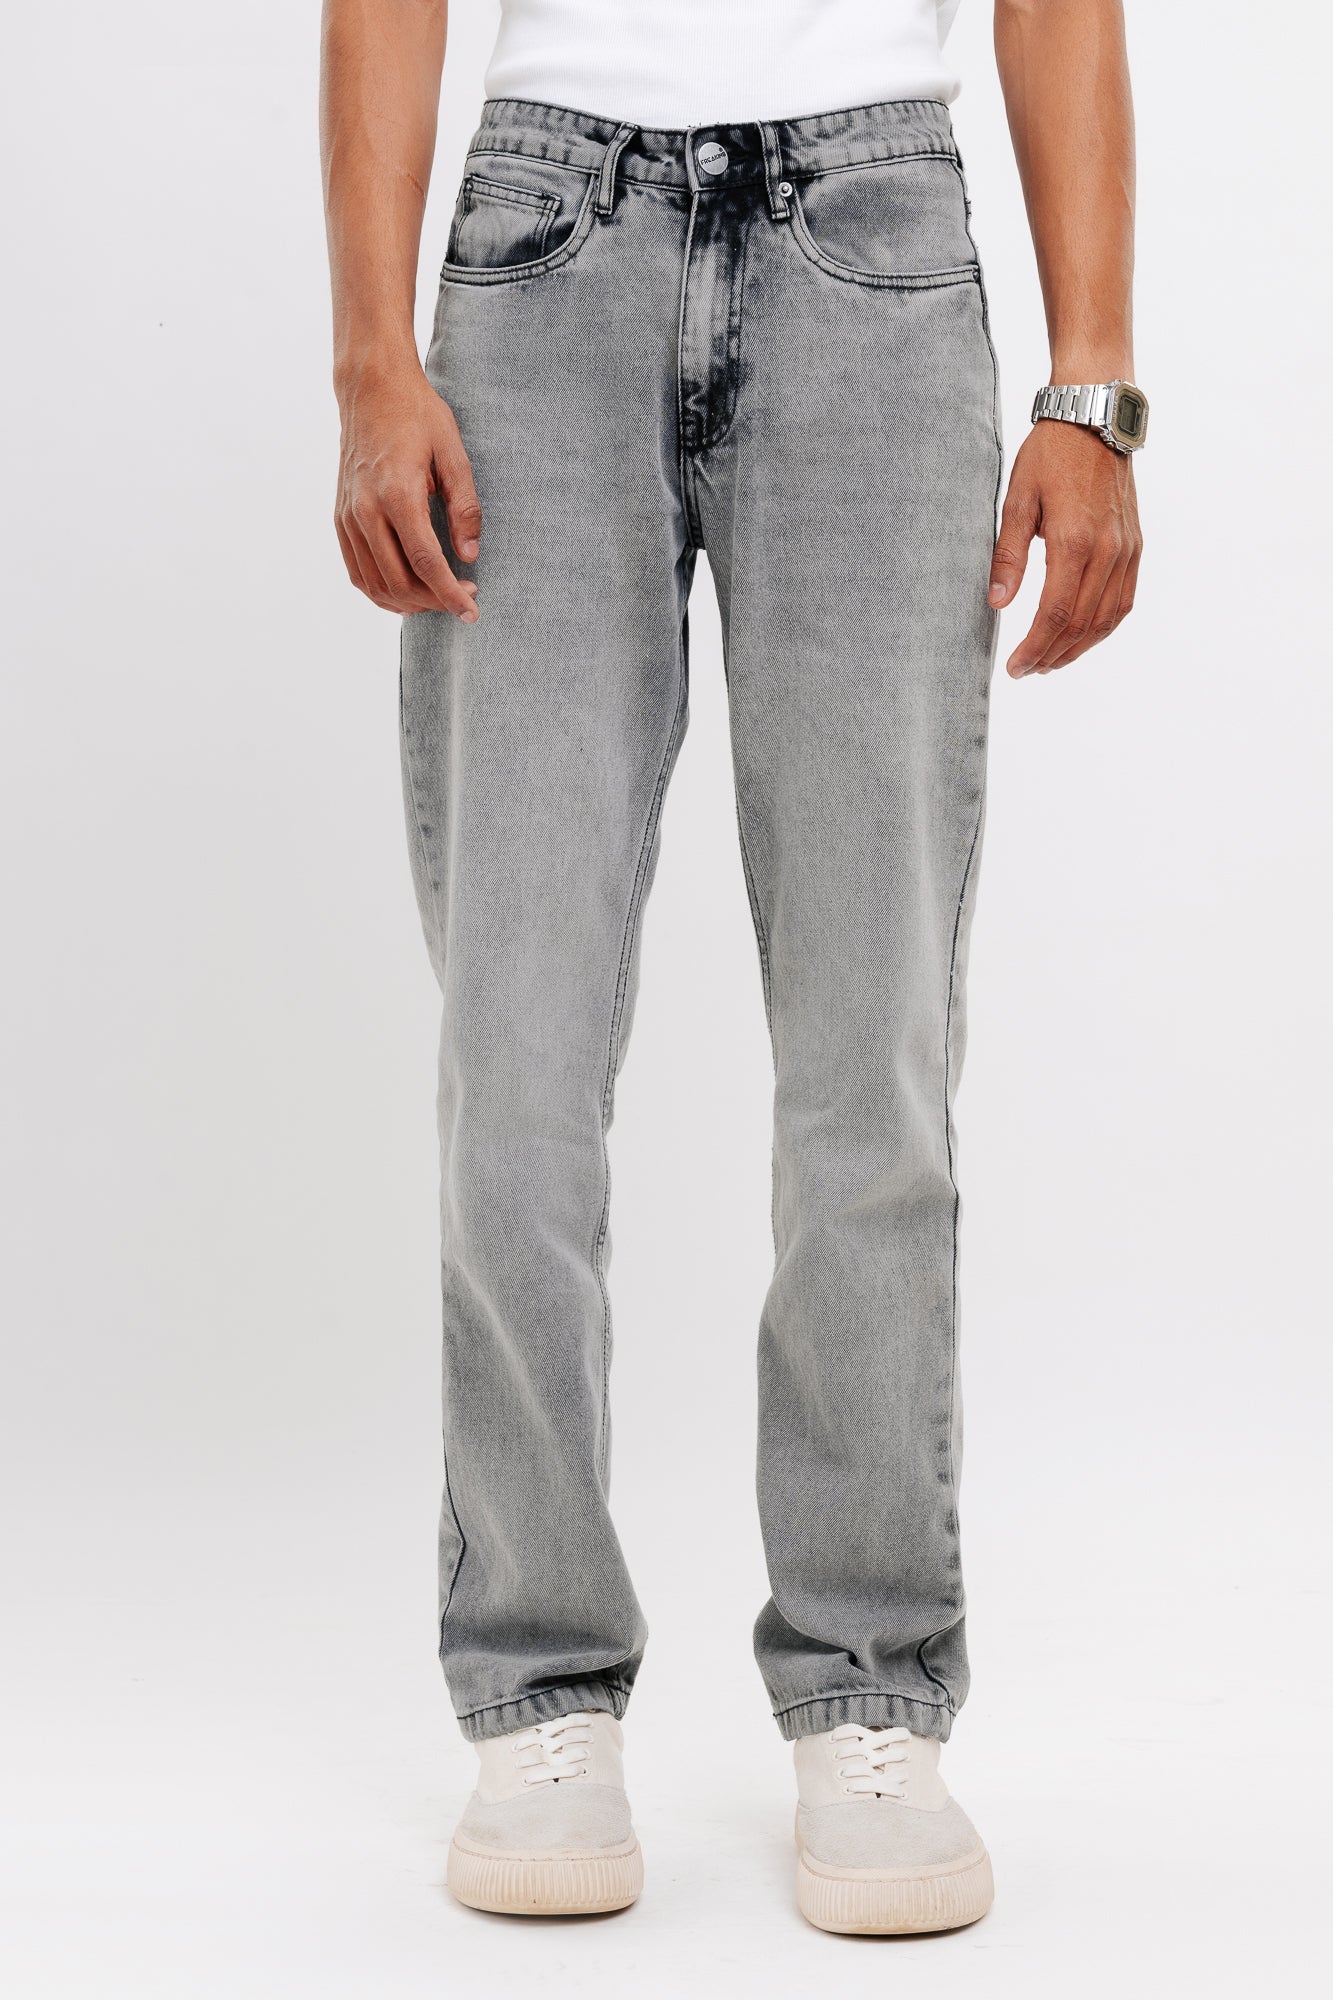 CHARCOAL MEN'S STRAIGHT JEANS